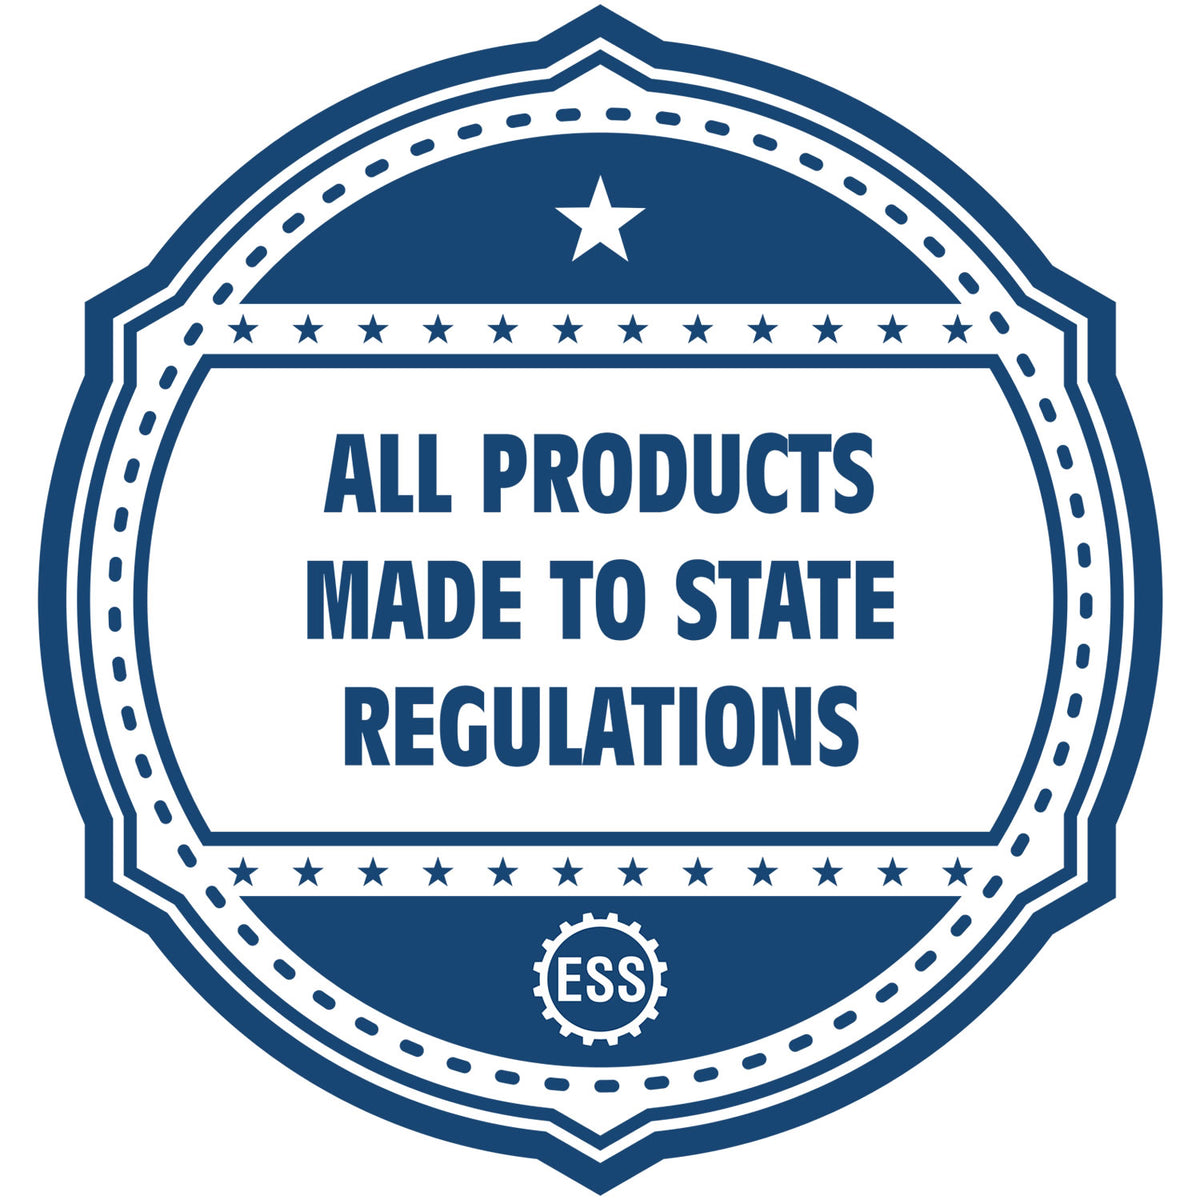 An icon or badge element for the State of Minnesota Extended Long Reach Engineer Seal showing that this product is made in compliance with state regulations.